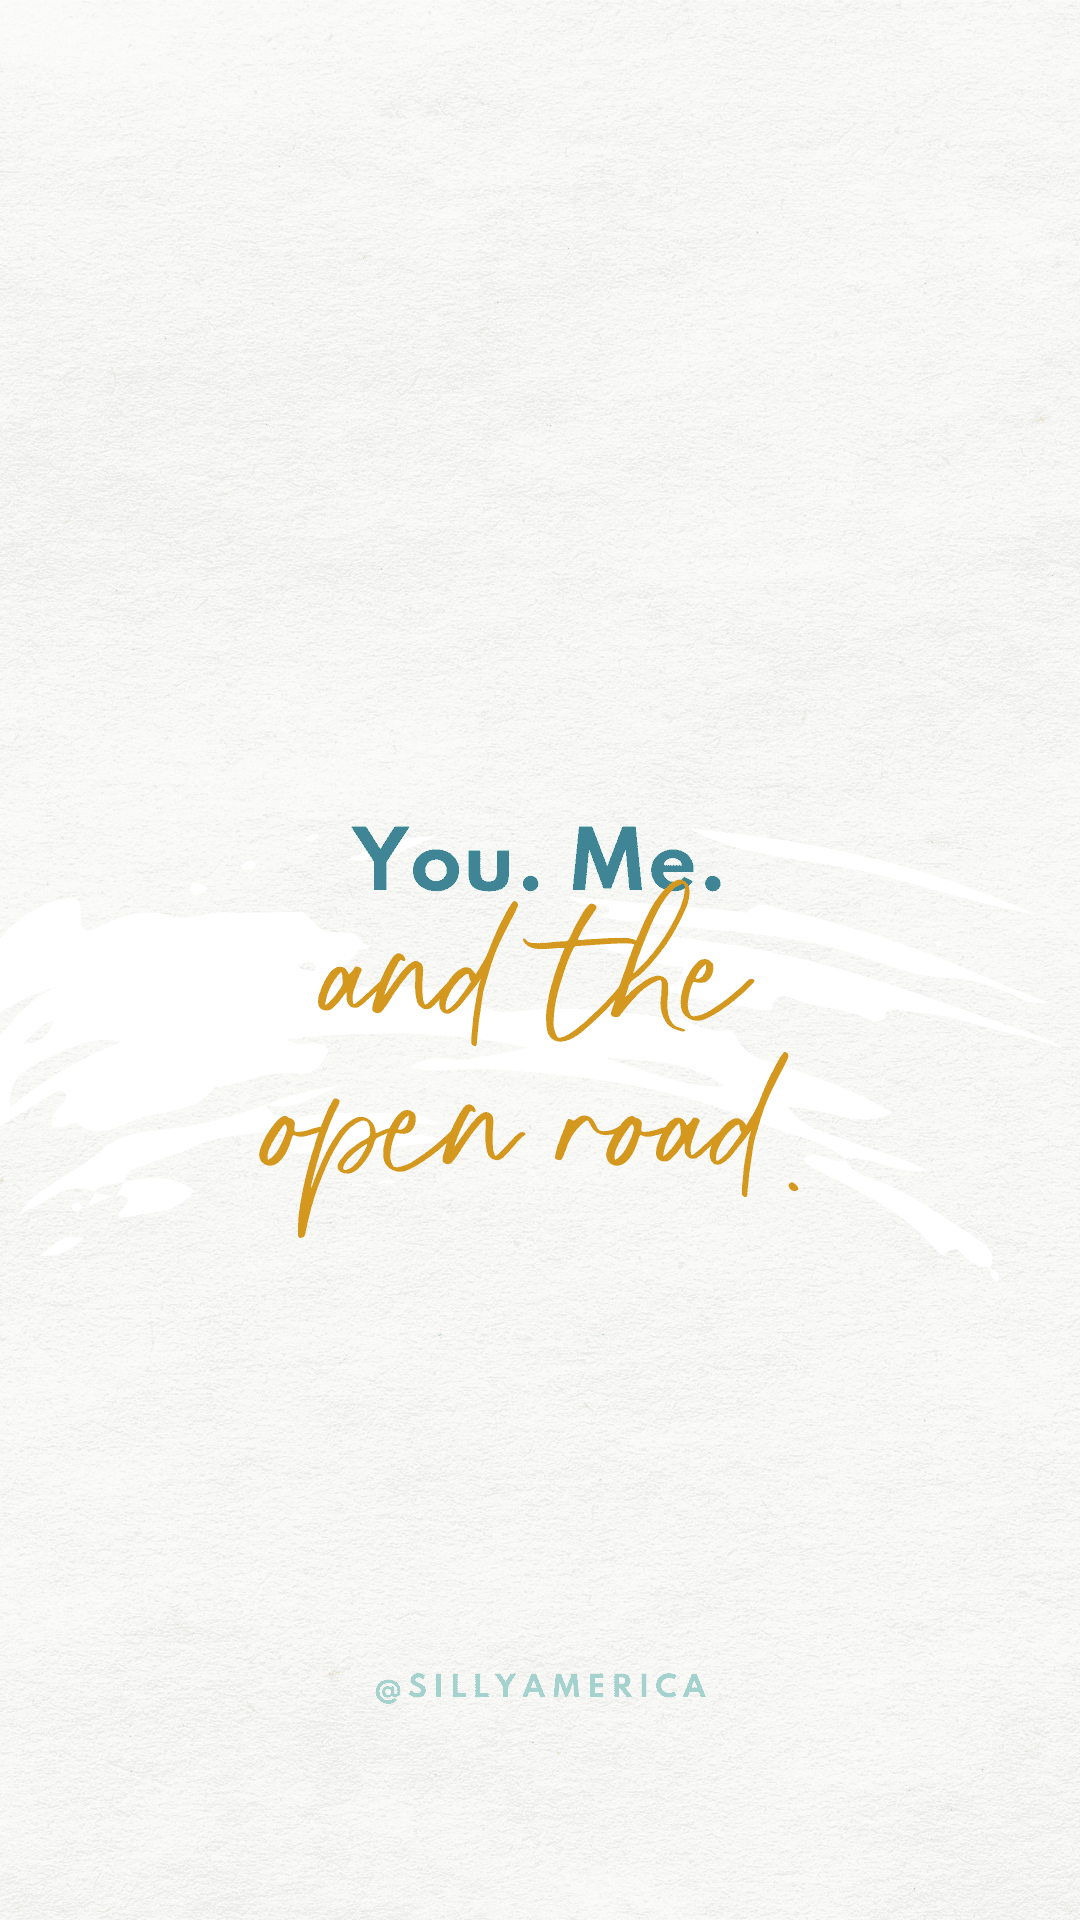 You. Me. And the open road. - Road Trip Captions for Instagram